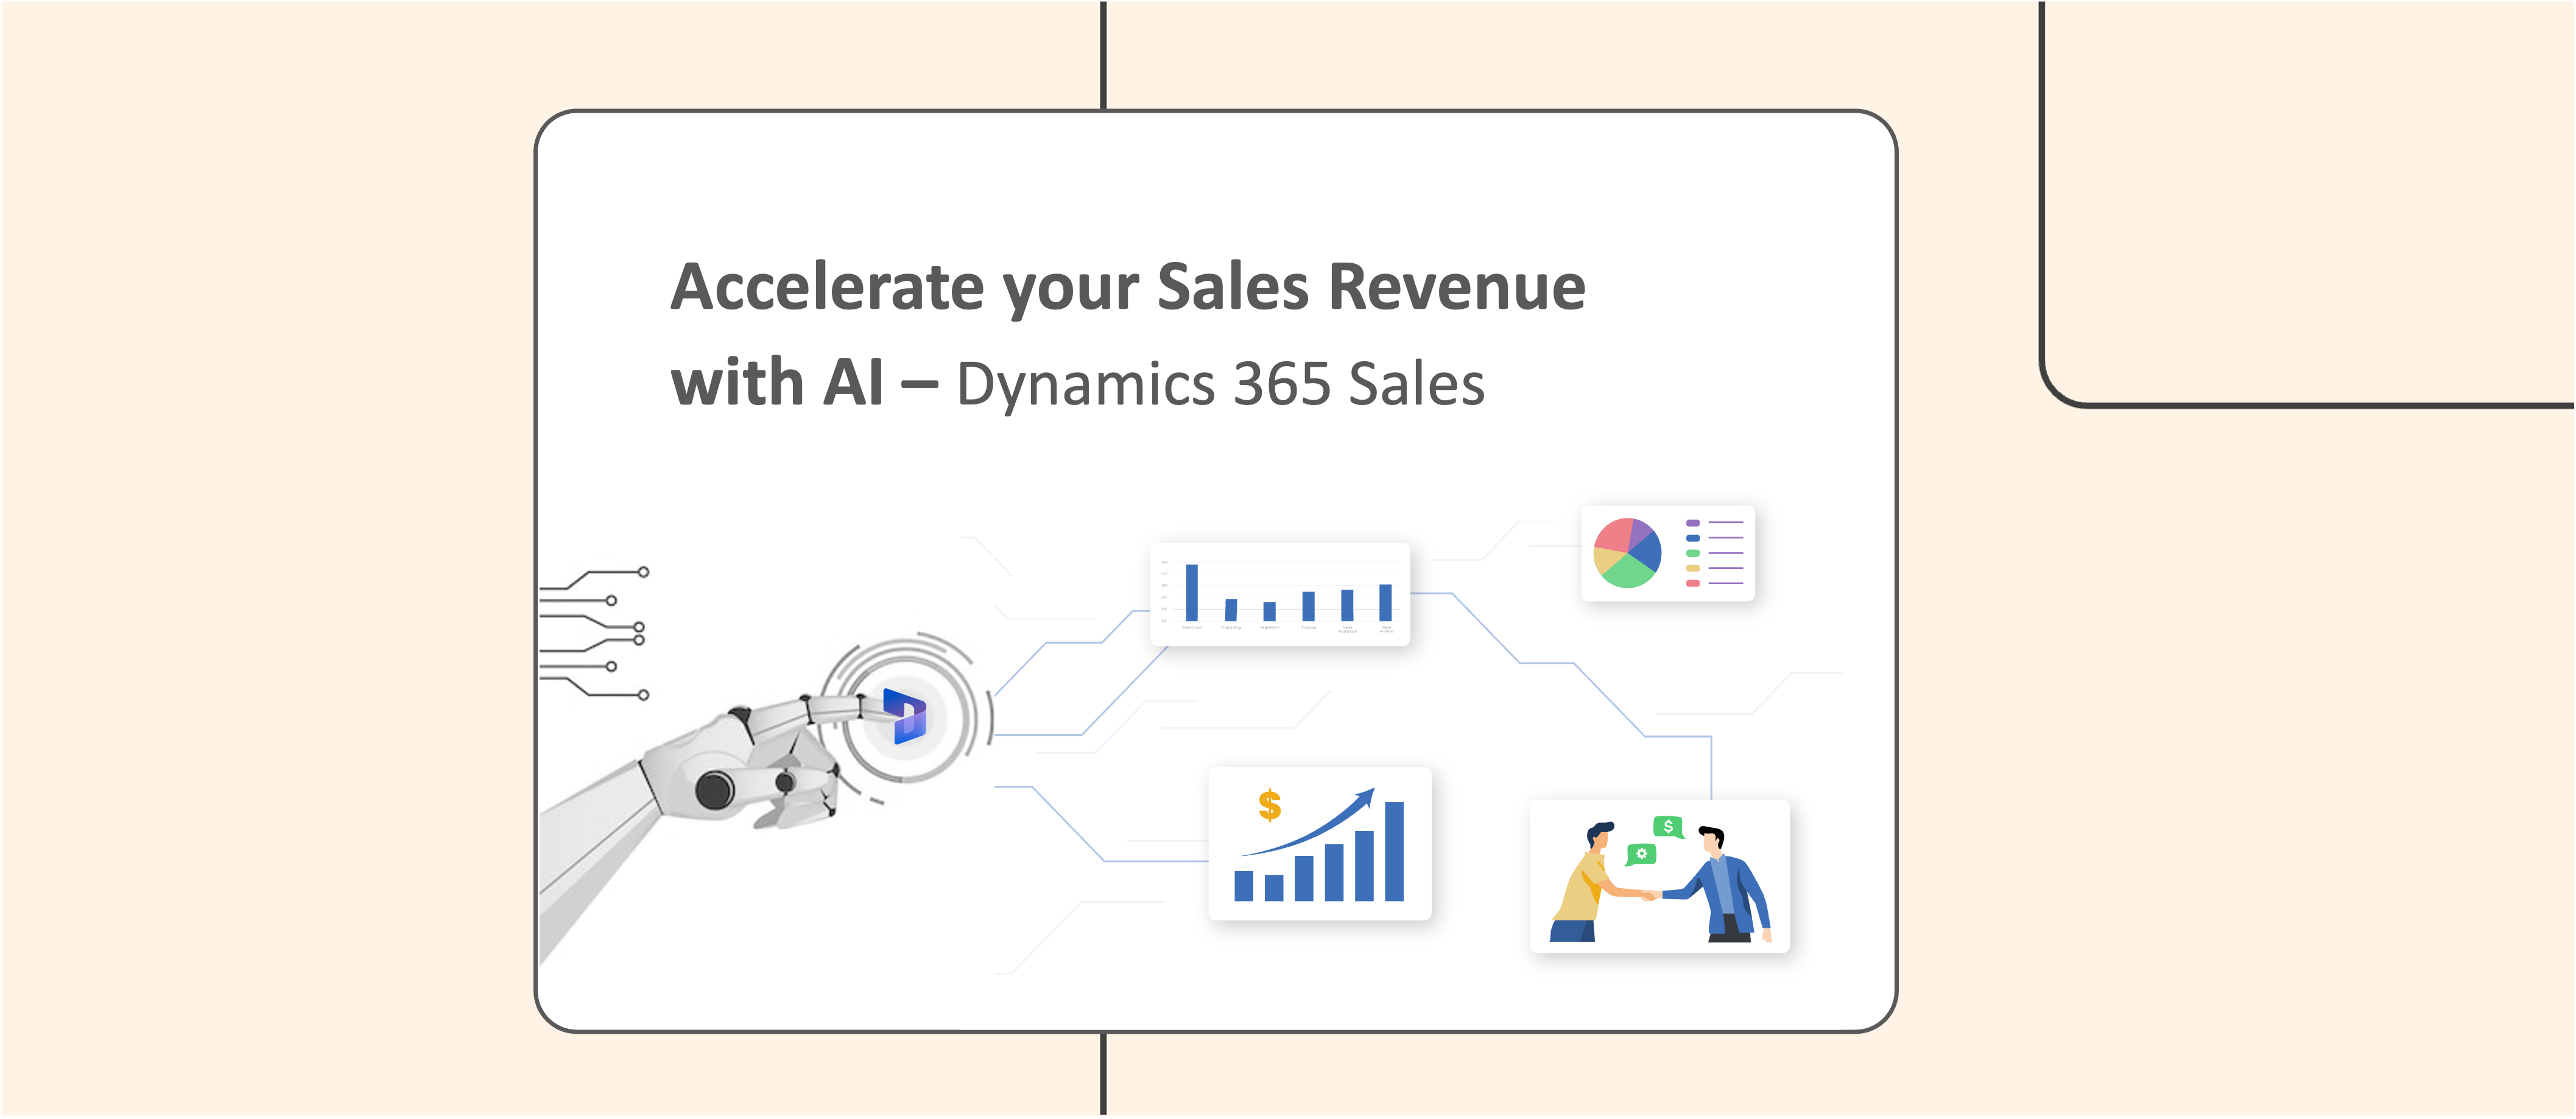 MS Dynamics 365 CRM Sales: Accelerate your Sales Revenue with AI